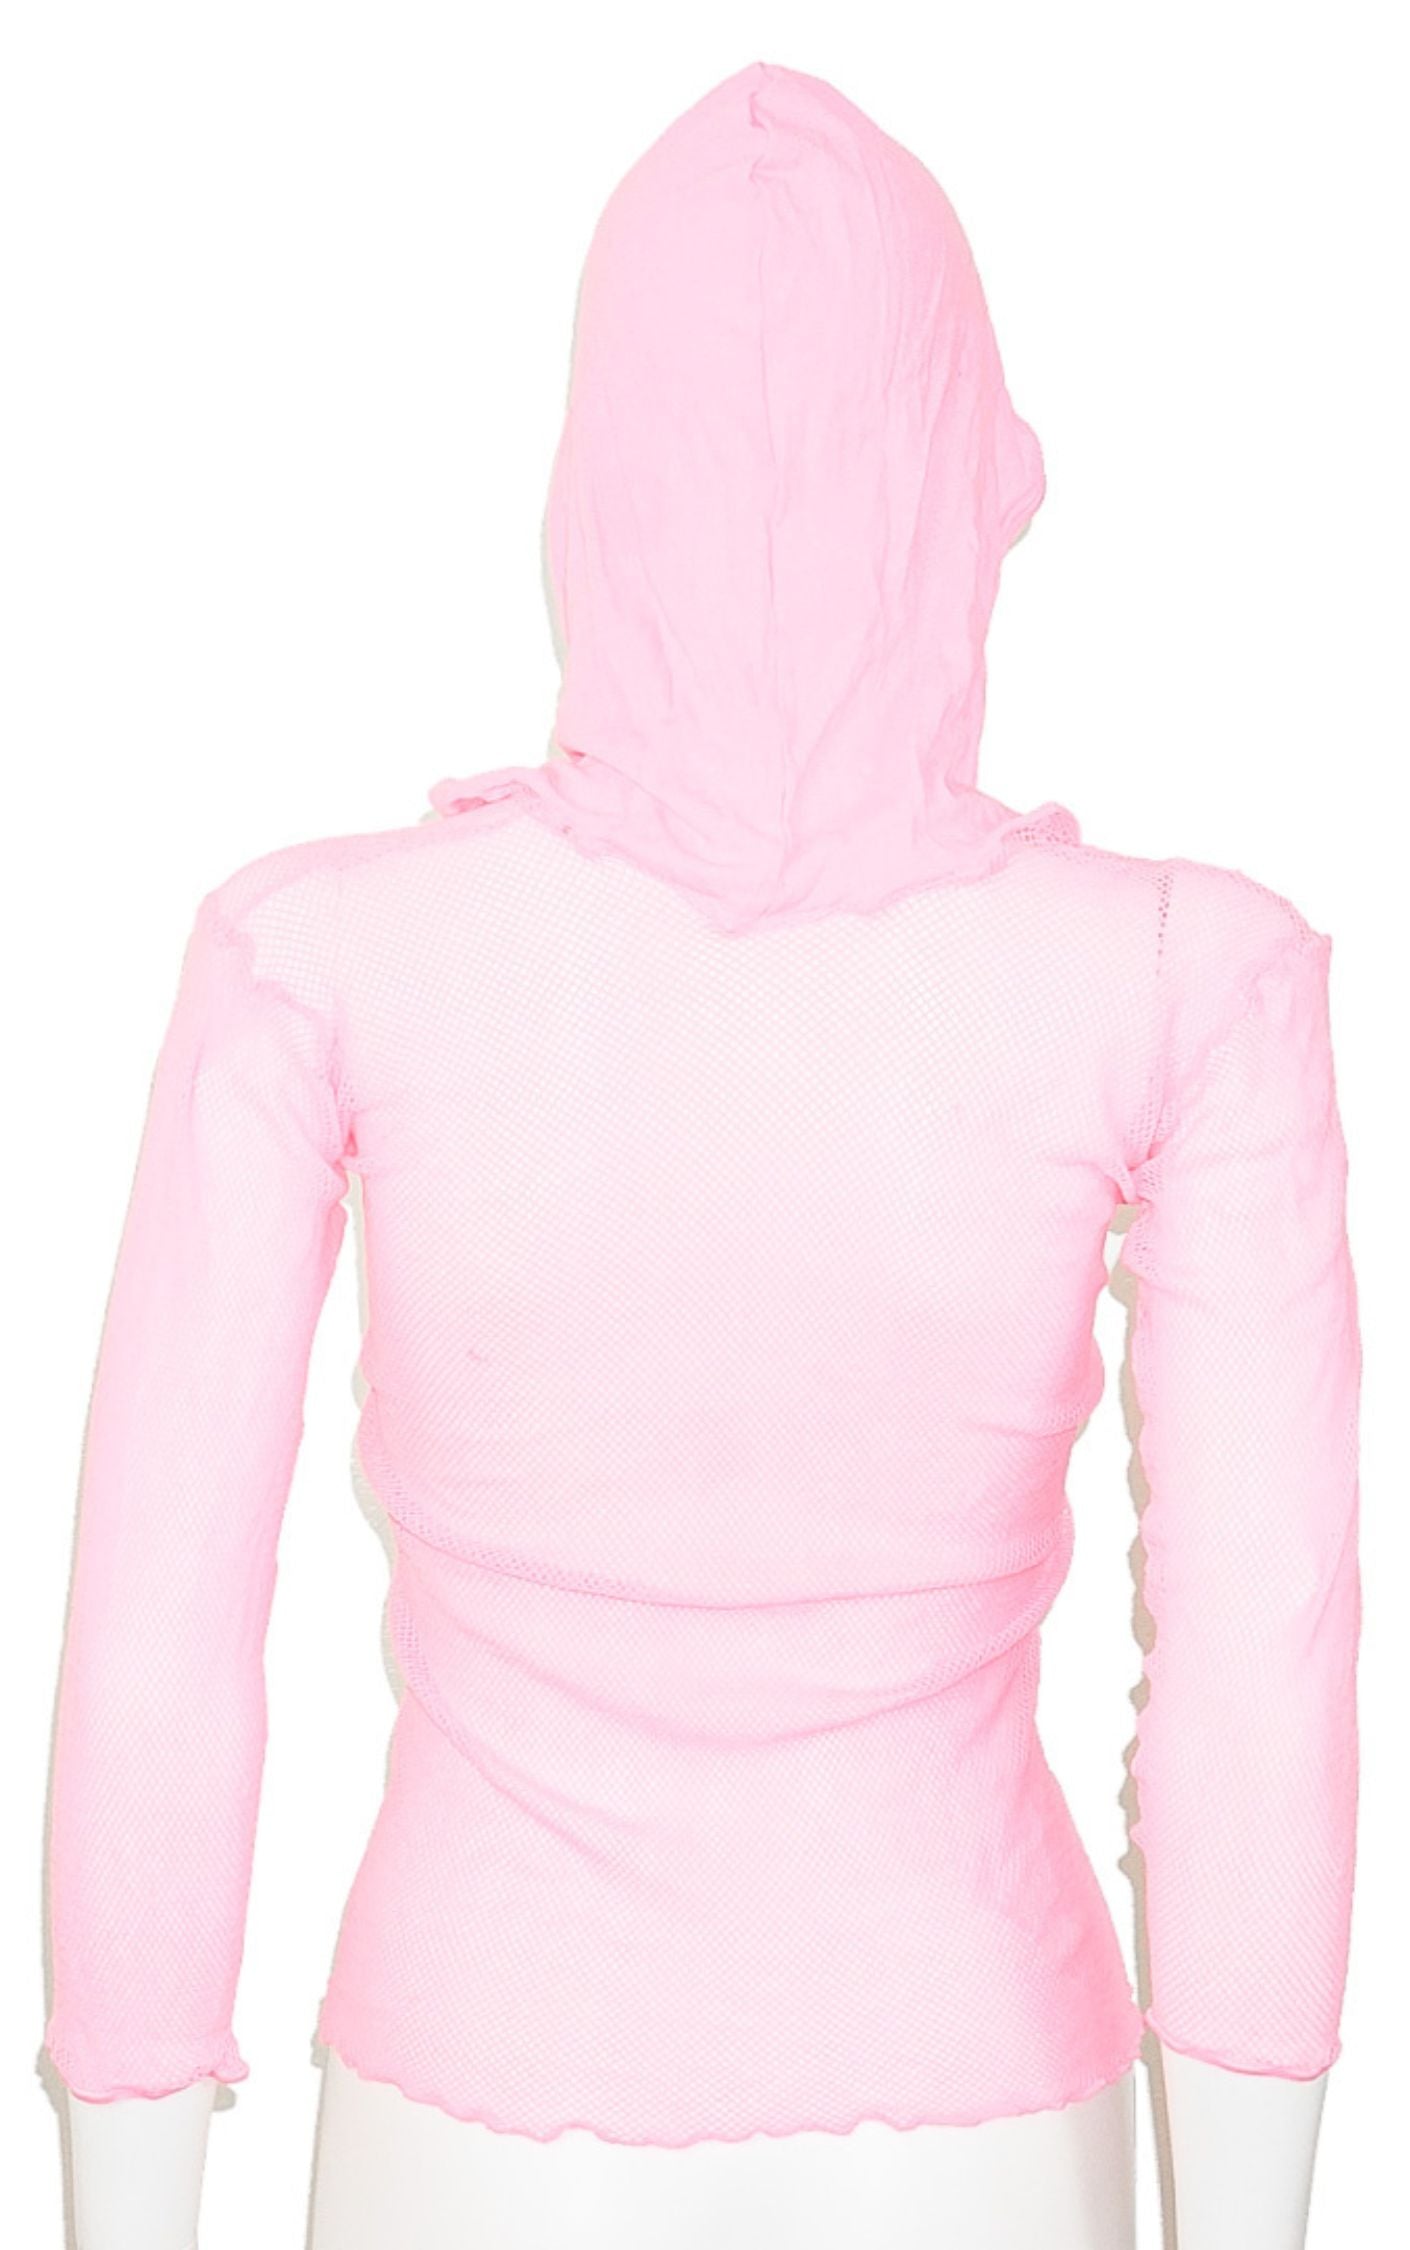 Hot Pink Fishnet Grid Mesh Hooded Top resellum